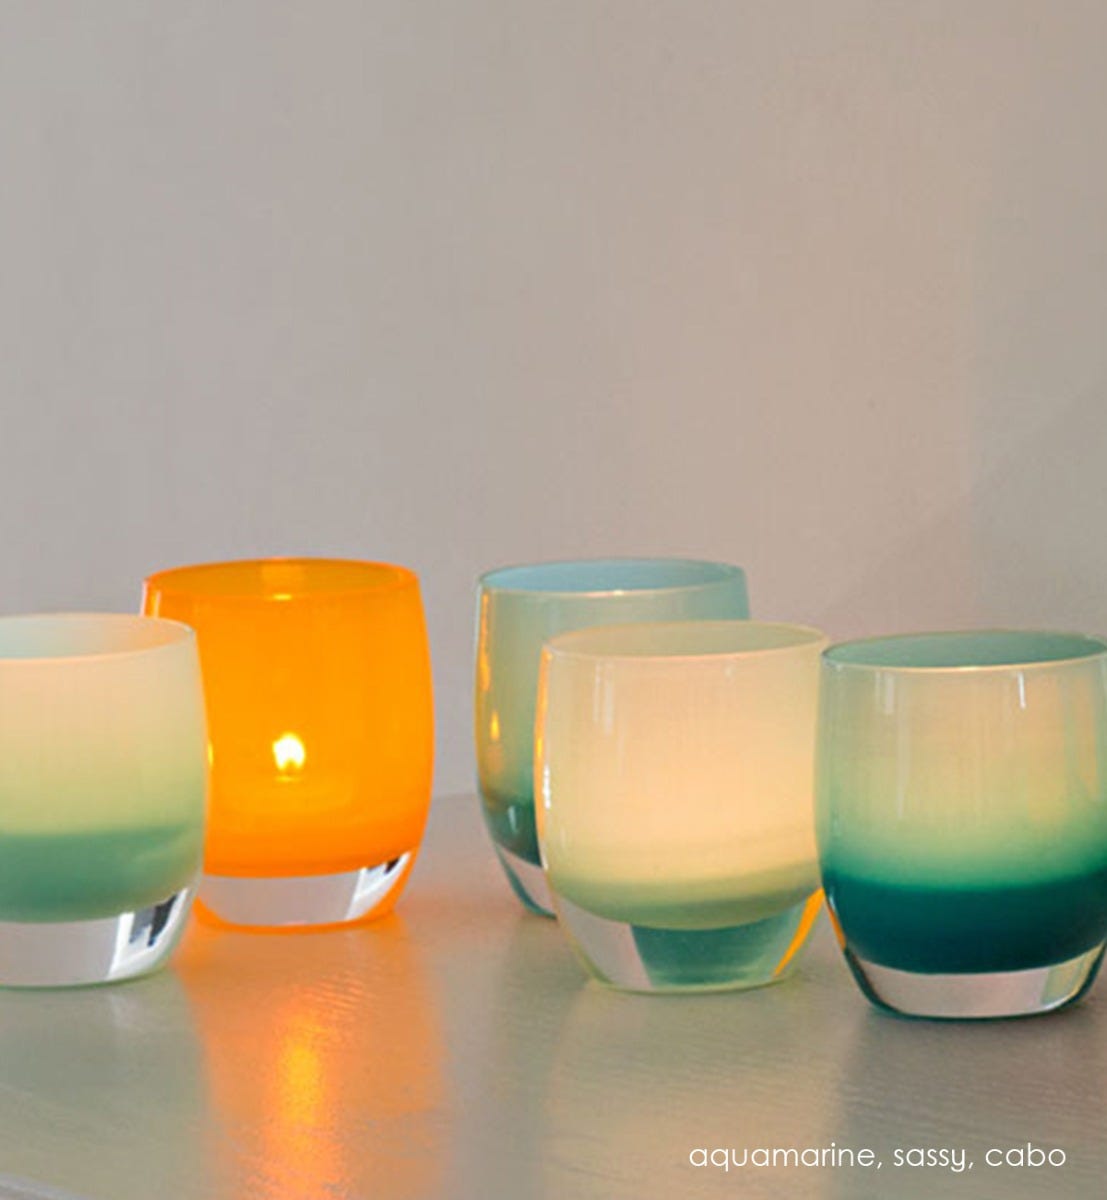 cabo opaque blue hand-blown glass votive candle holder. Paired with aquamarine and sassy.